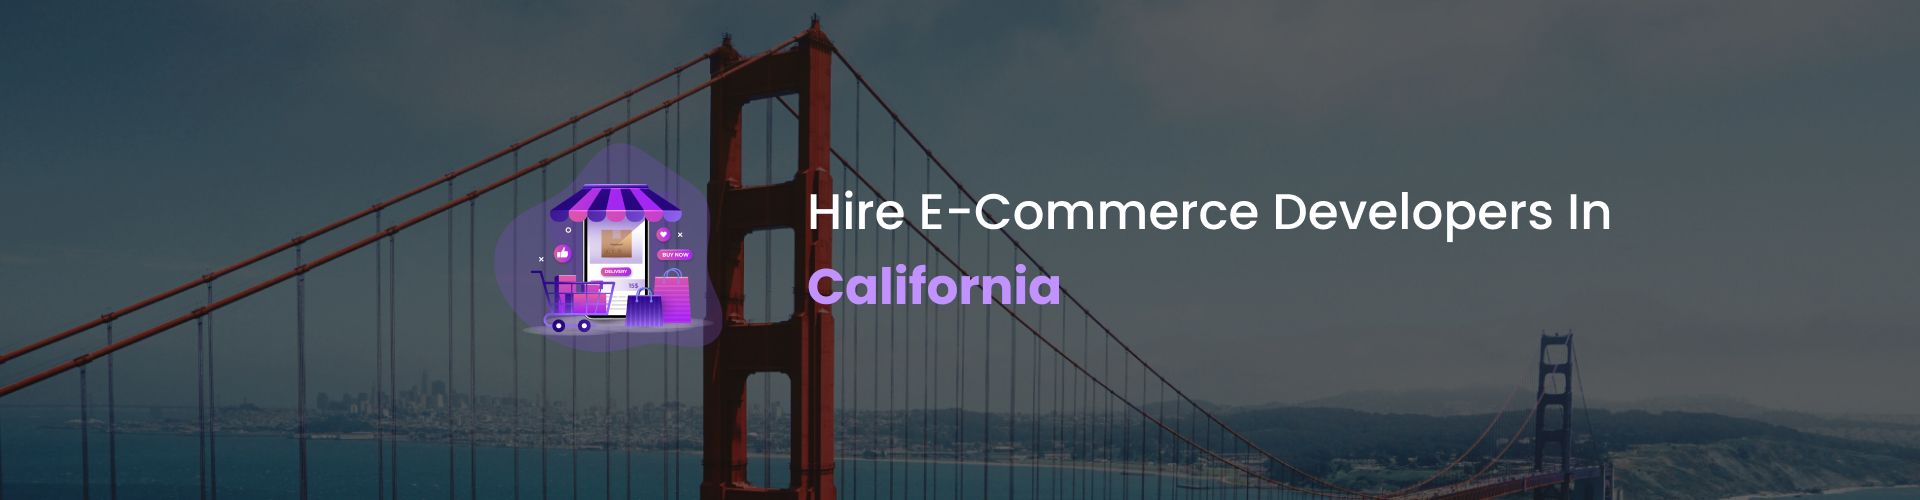 hire ecommerce developers in california